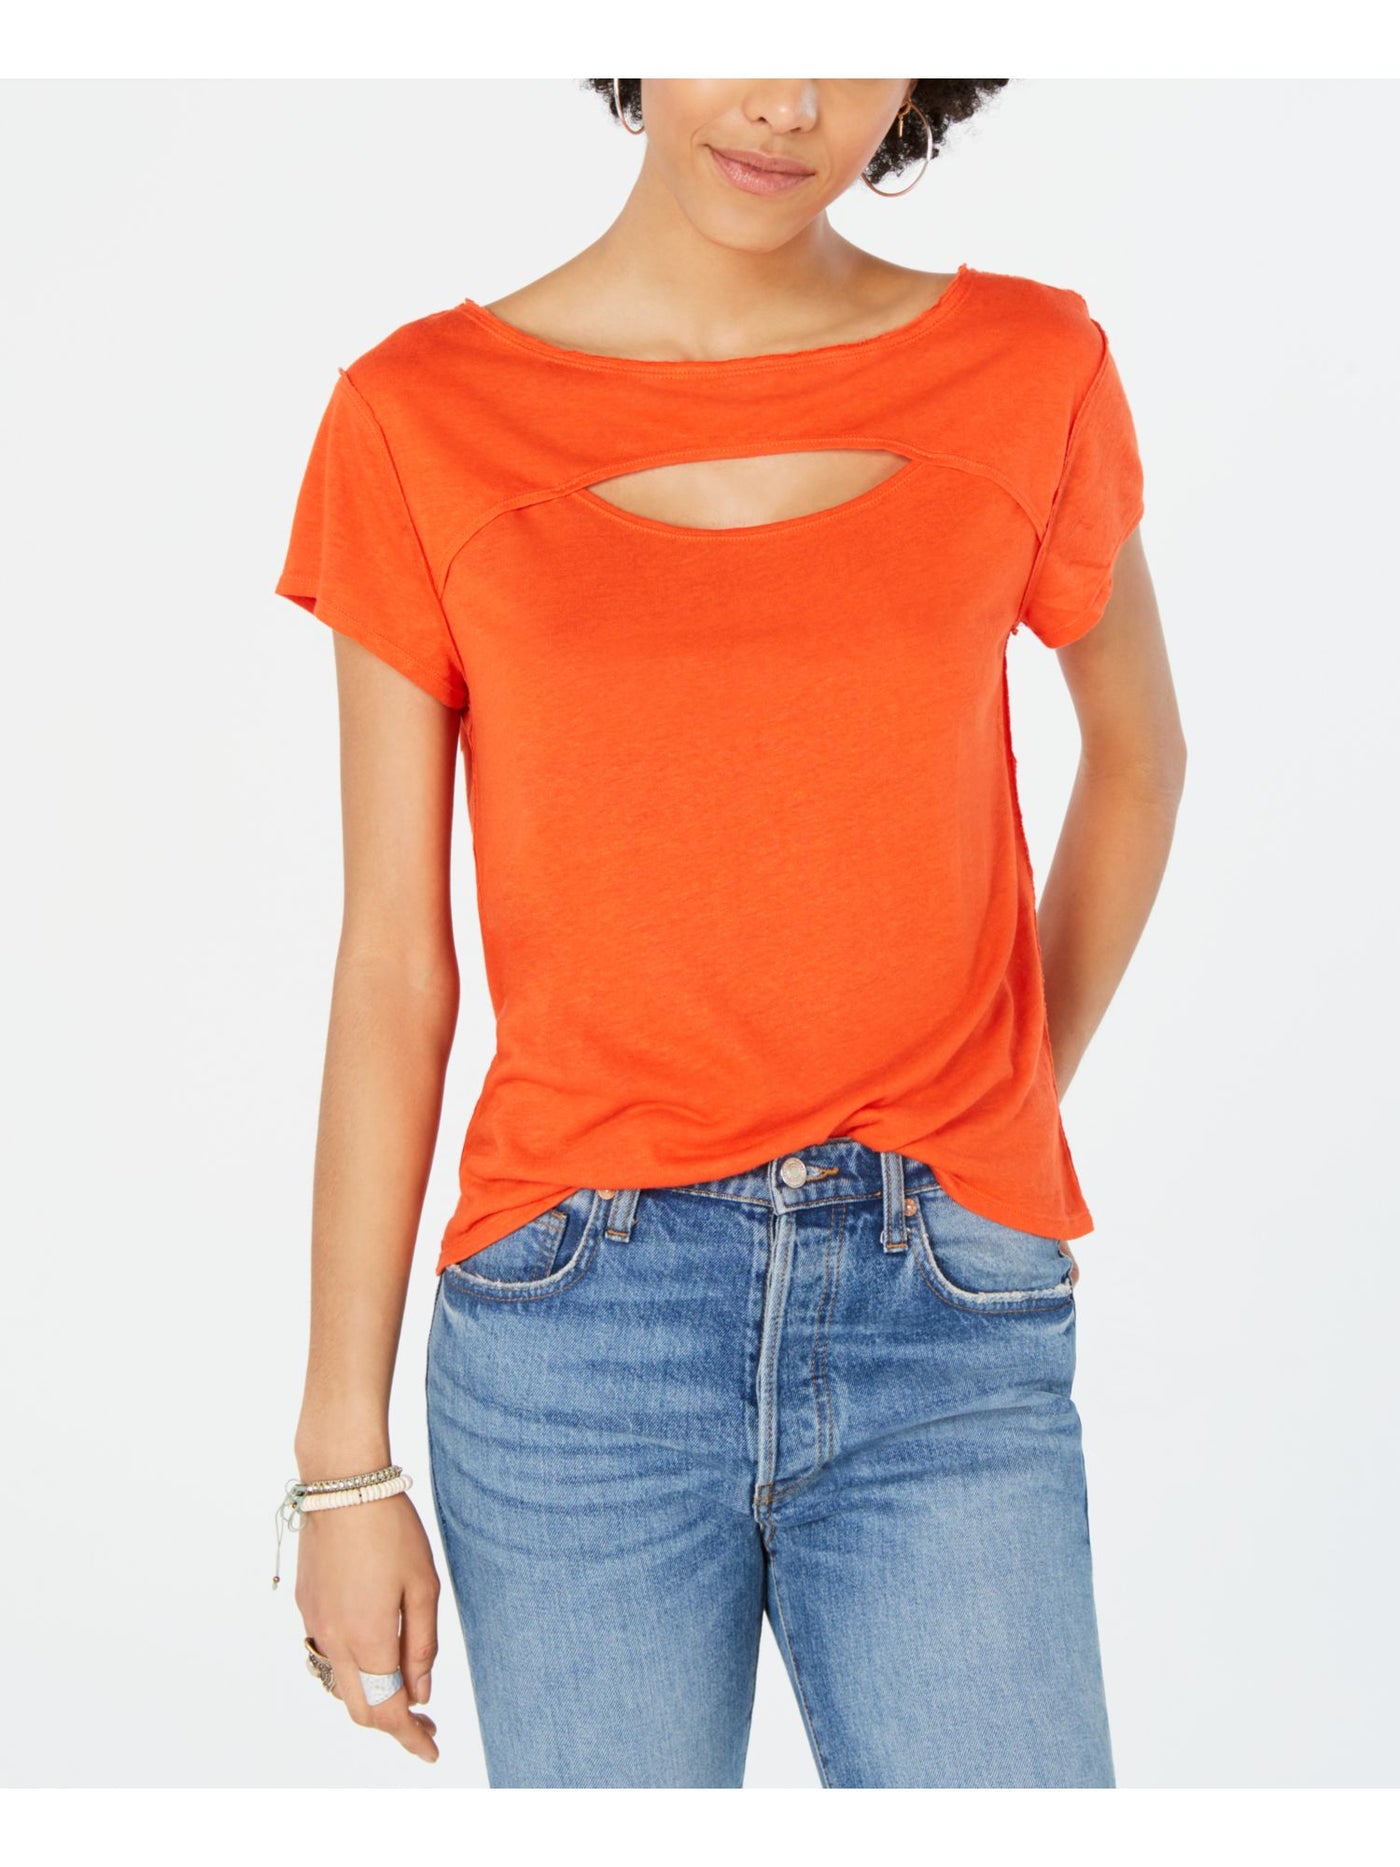 FREE PEOPLE Womens Cut Out Short Sleeve Crew Neck T-Shirt